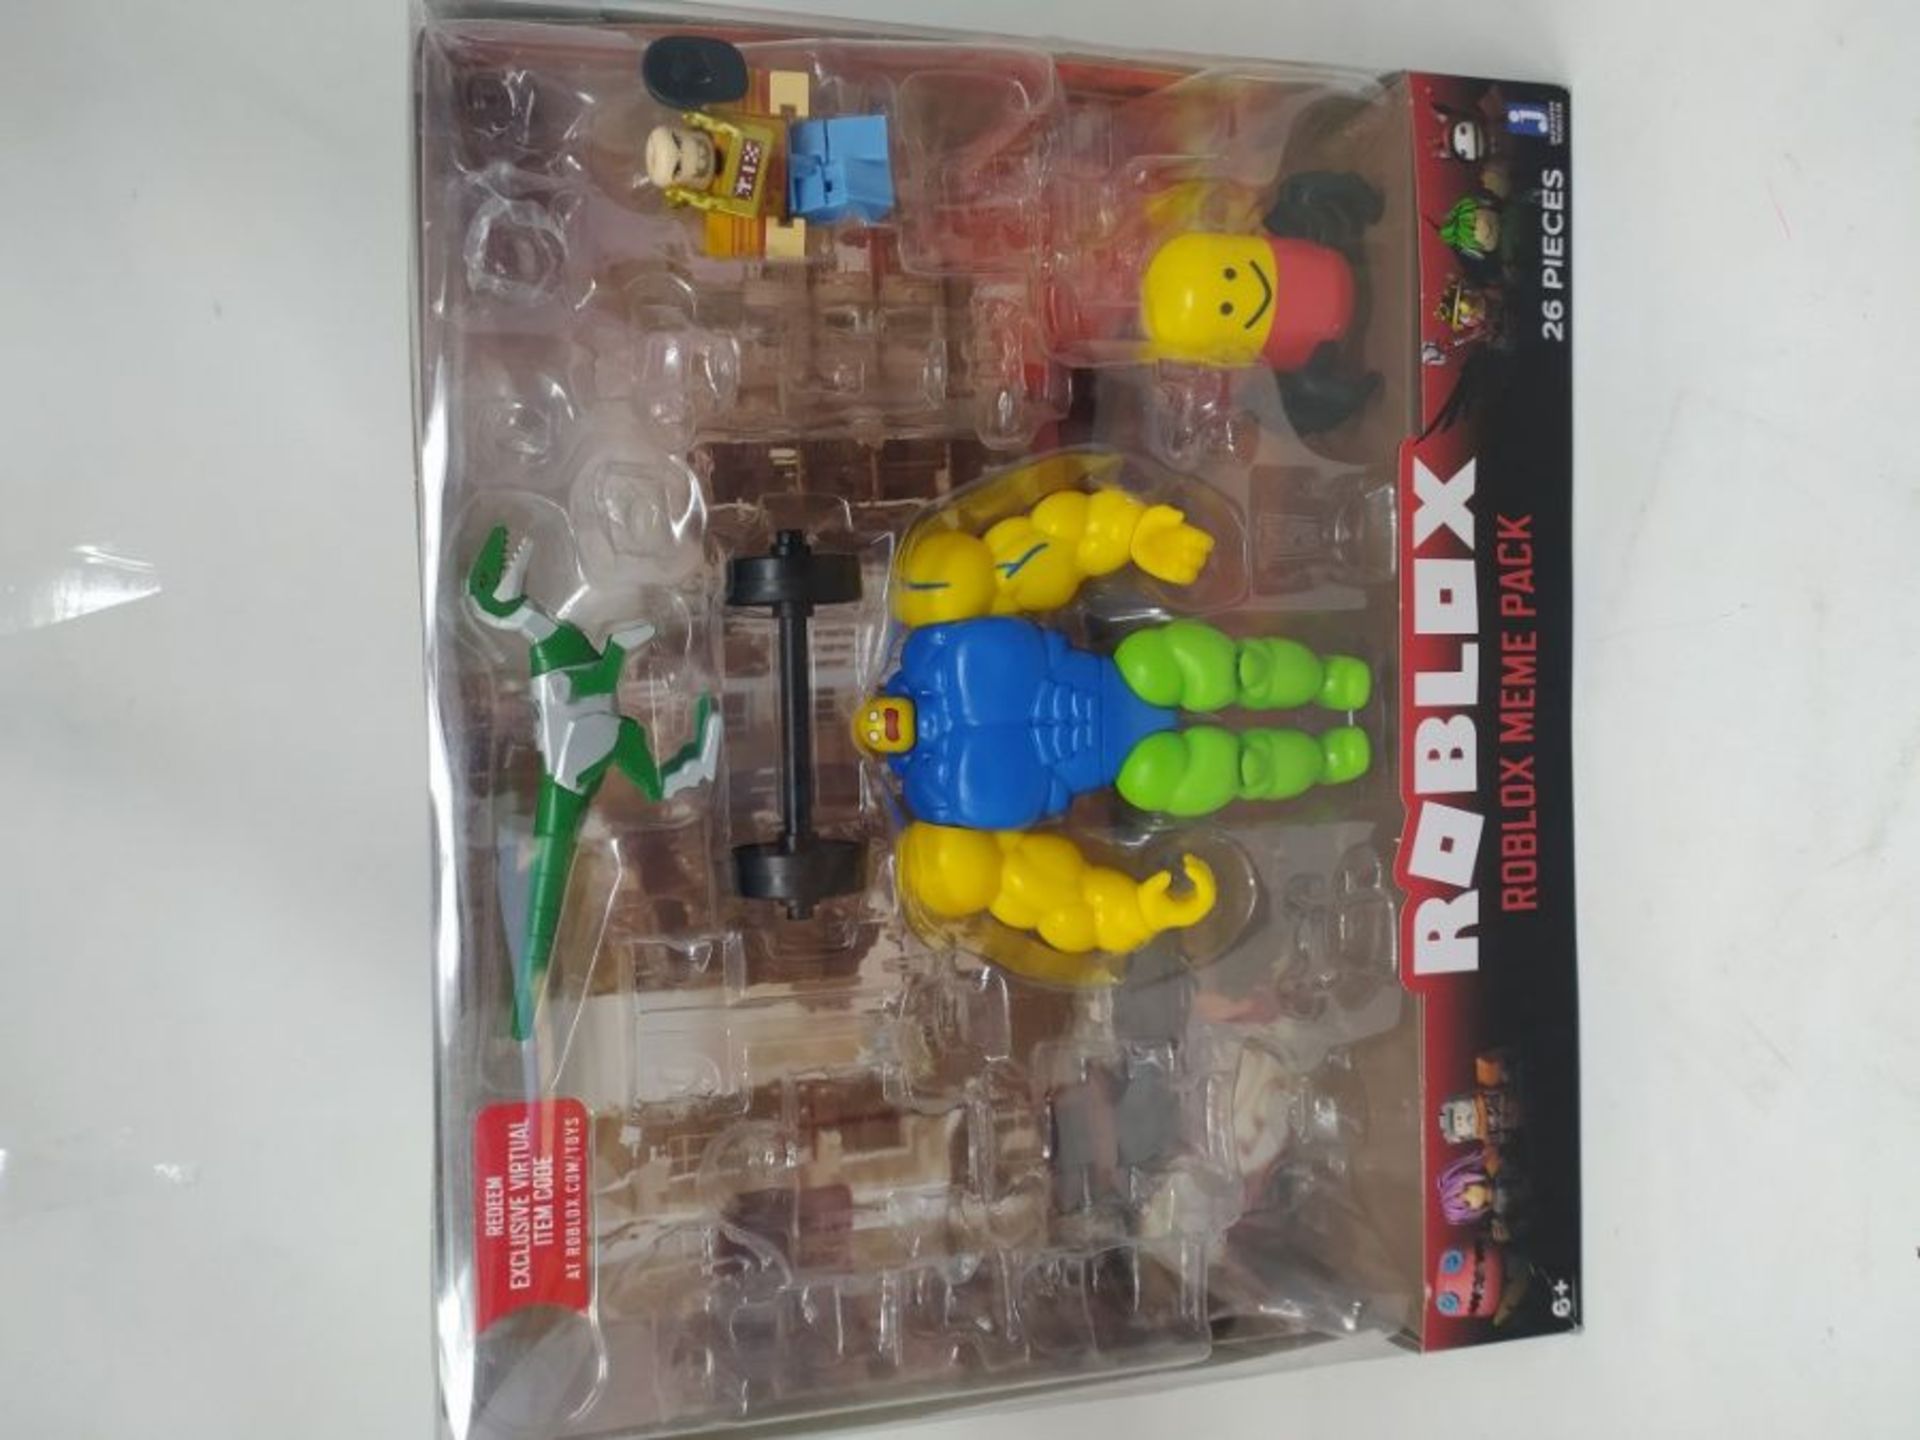 Roblox ROB0338 Action Collection-Meme Pack Playset [Includes Exclusive Virtual Item] - Image 2 of 2